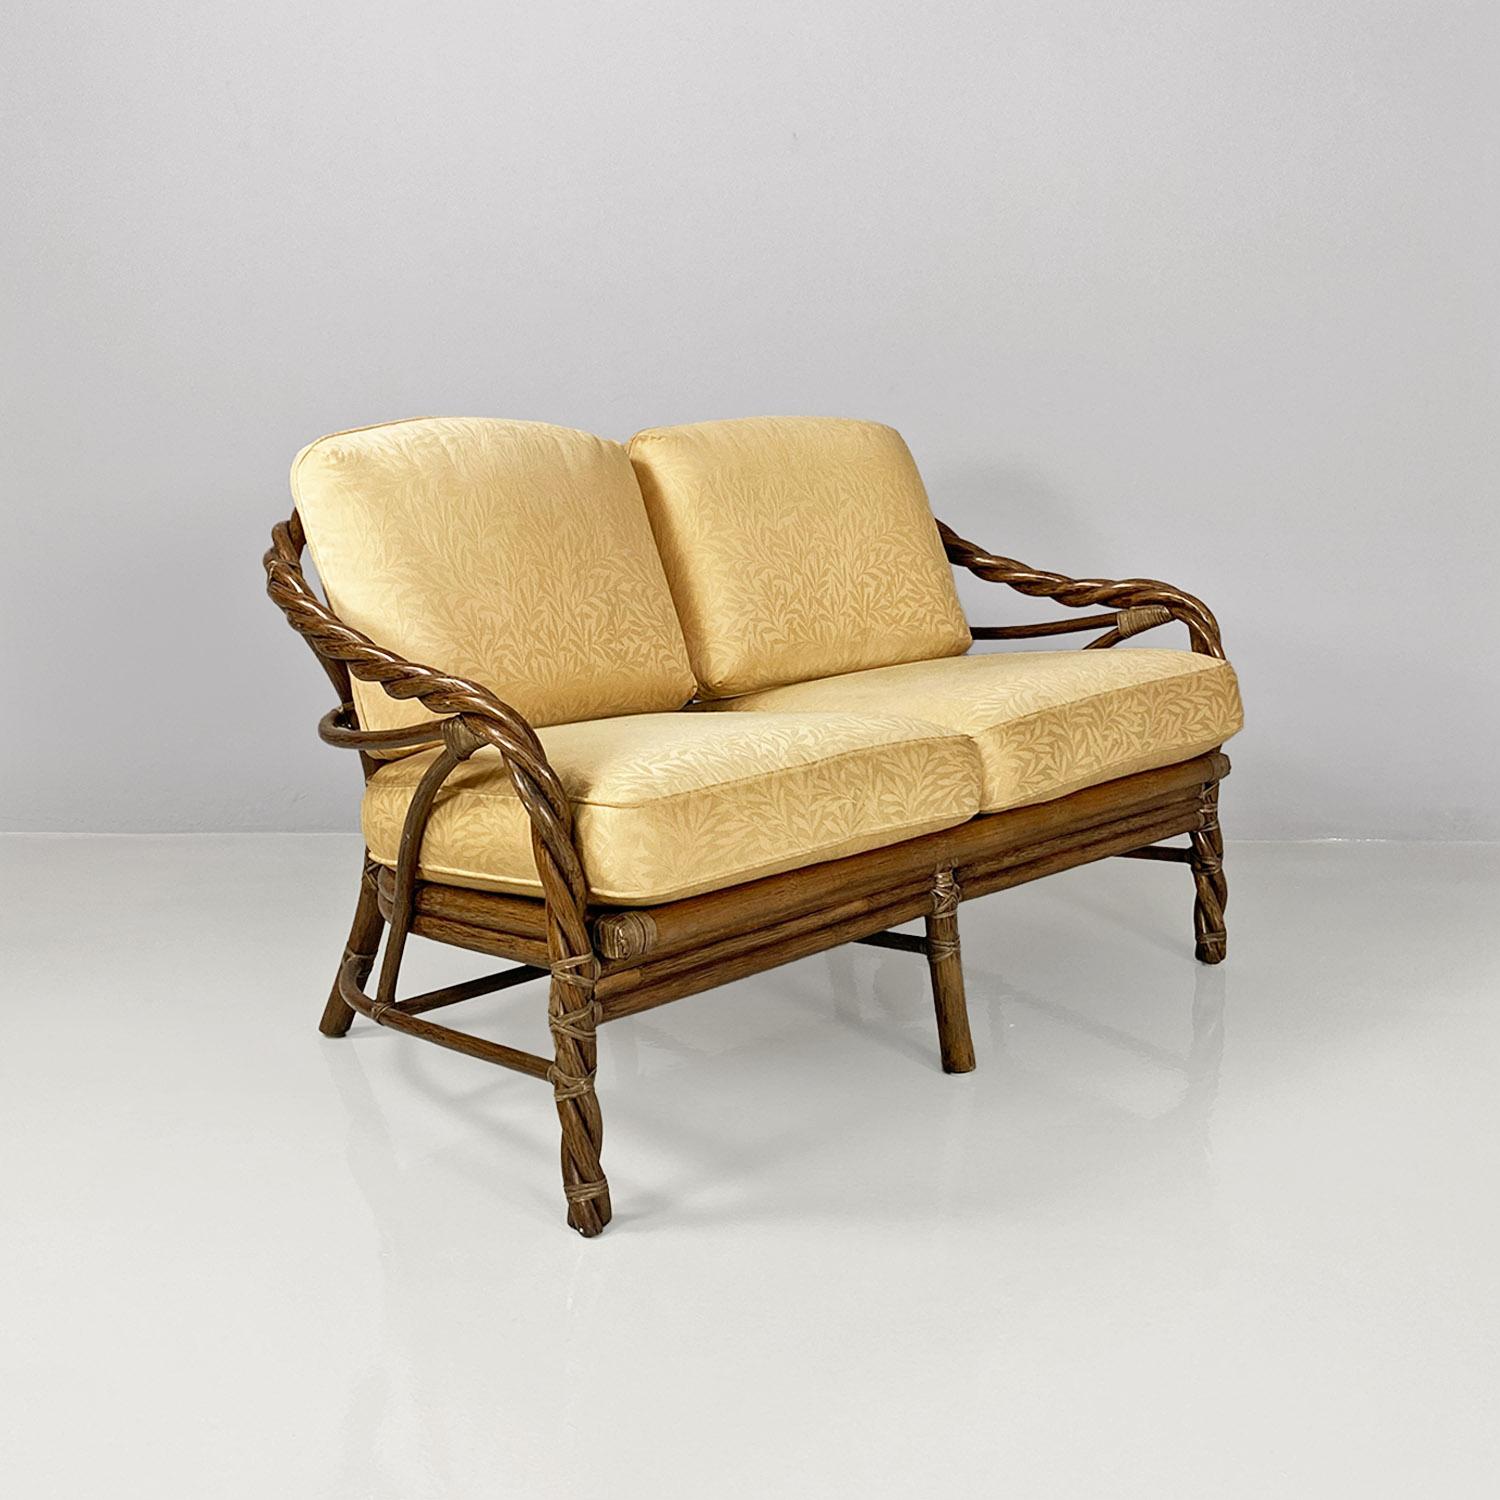 Modern American modern rattan and beige floreal fabric sofa by McGuire Company, 1970s For Sale